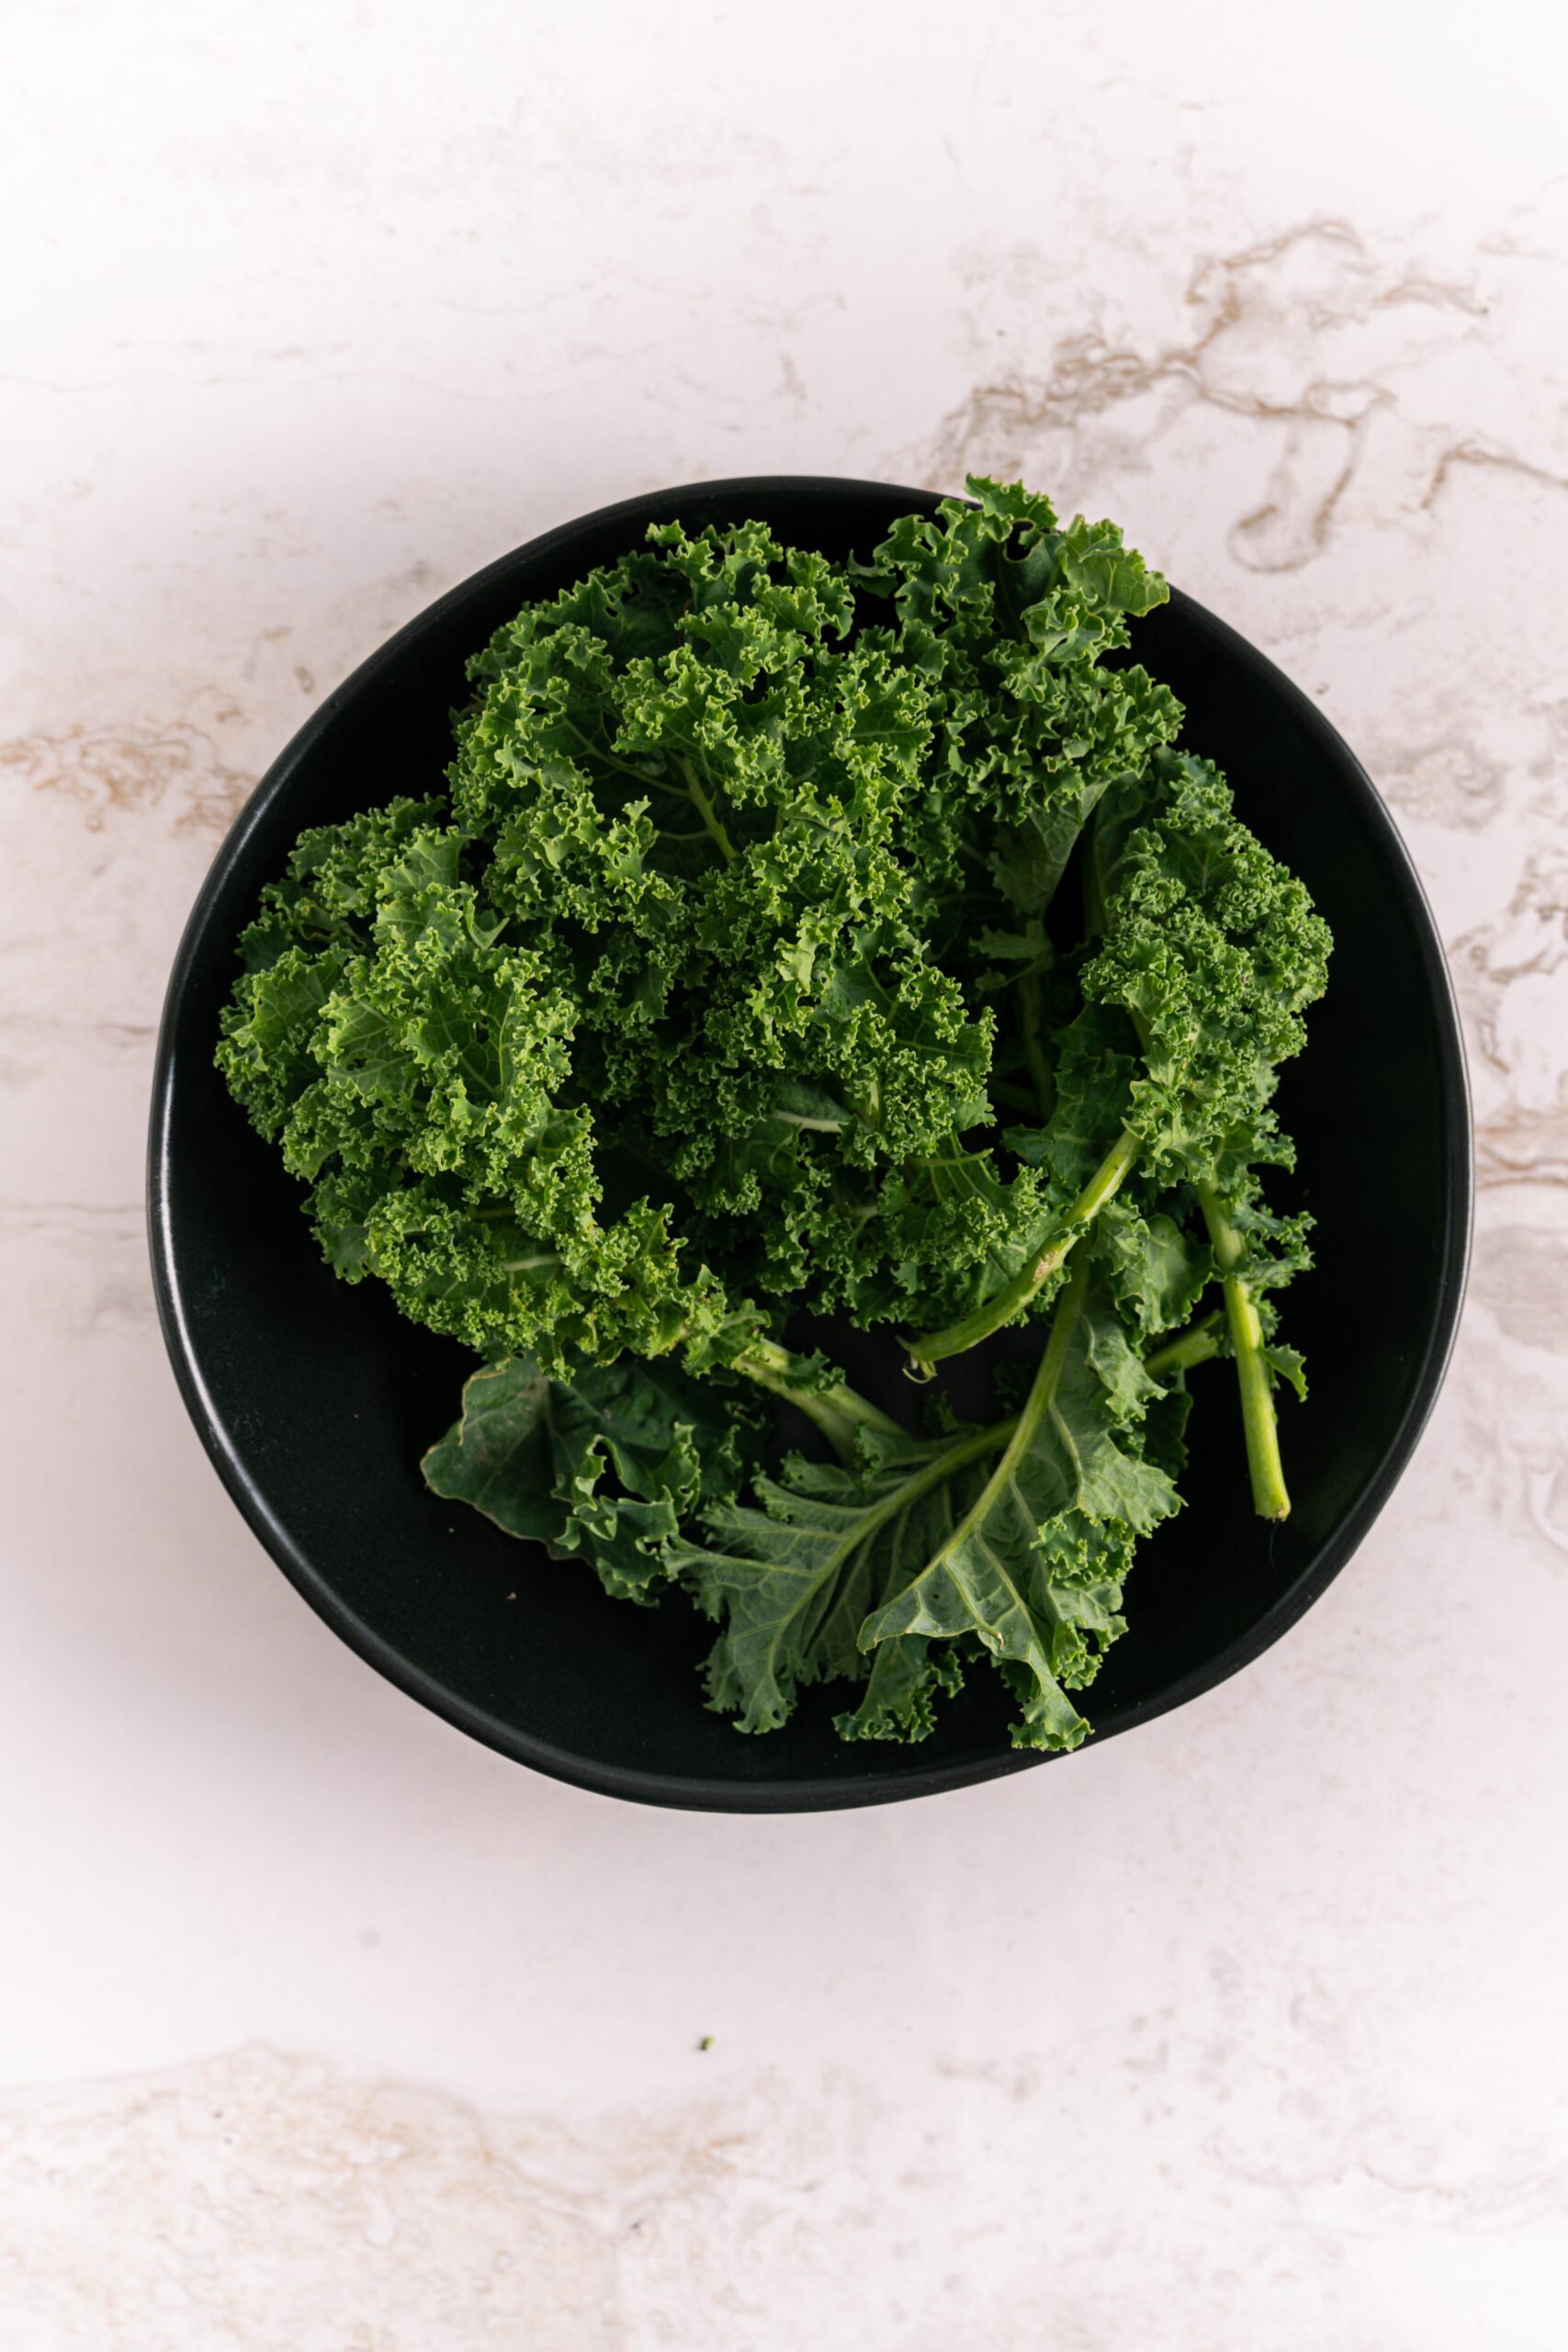 Kale: Is is good or bad for you?